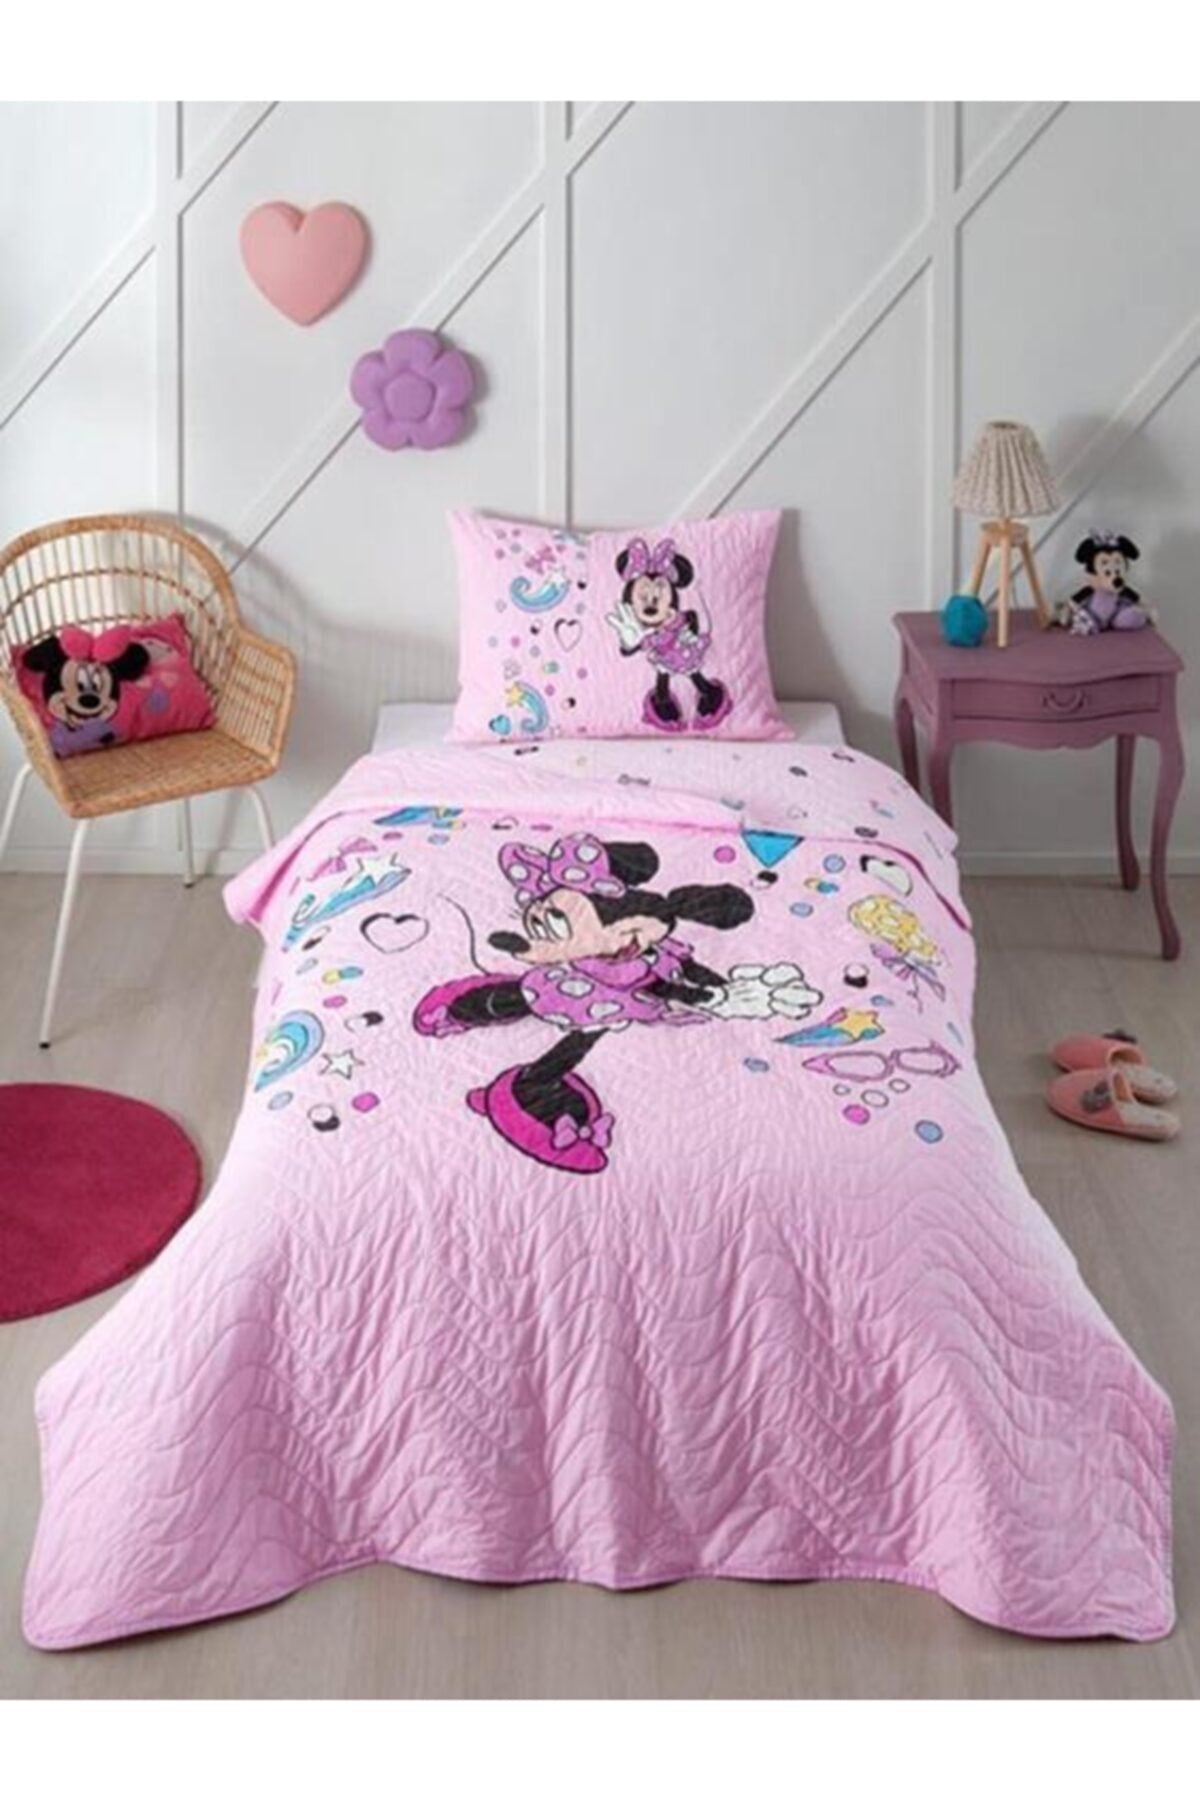 Licensed Quilted Duvet Cover Set Minnie Mouse Icon